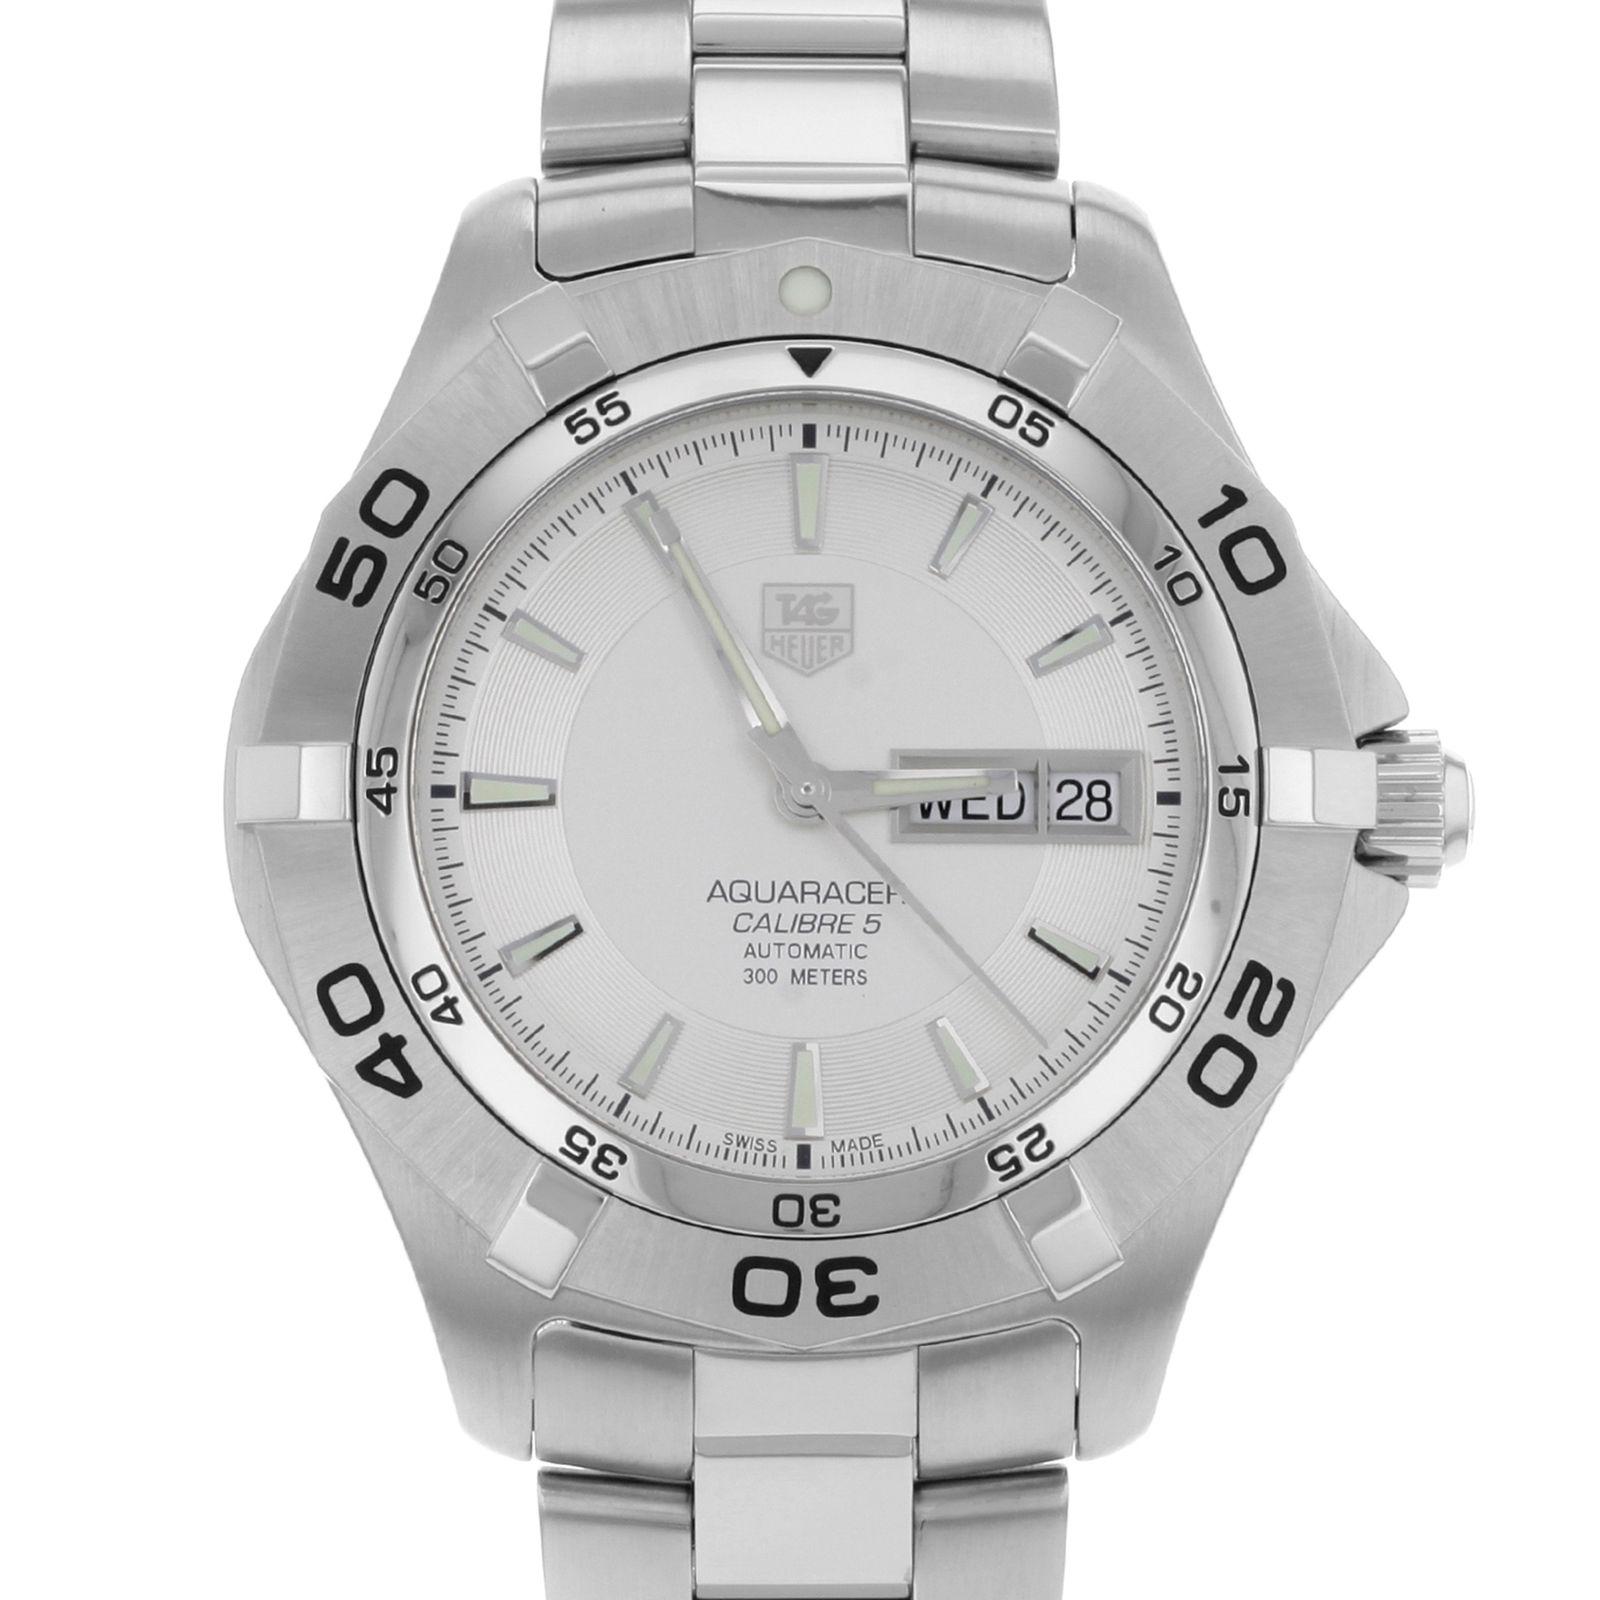 (10119)
This display model TAG Heuer 2000 WAF2011.BA0818 is a beautiful men's timepiece that is powered by an automatic movement which is cased in a stainless steel case. It has a round shape face, day & date dial and has hand sticks style markers.